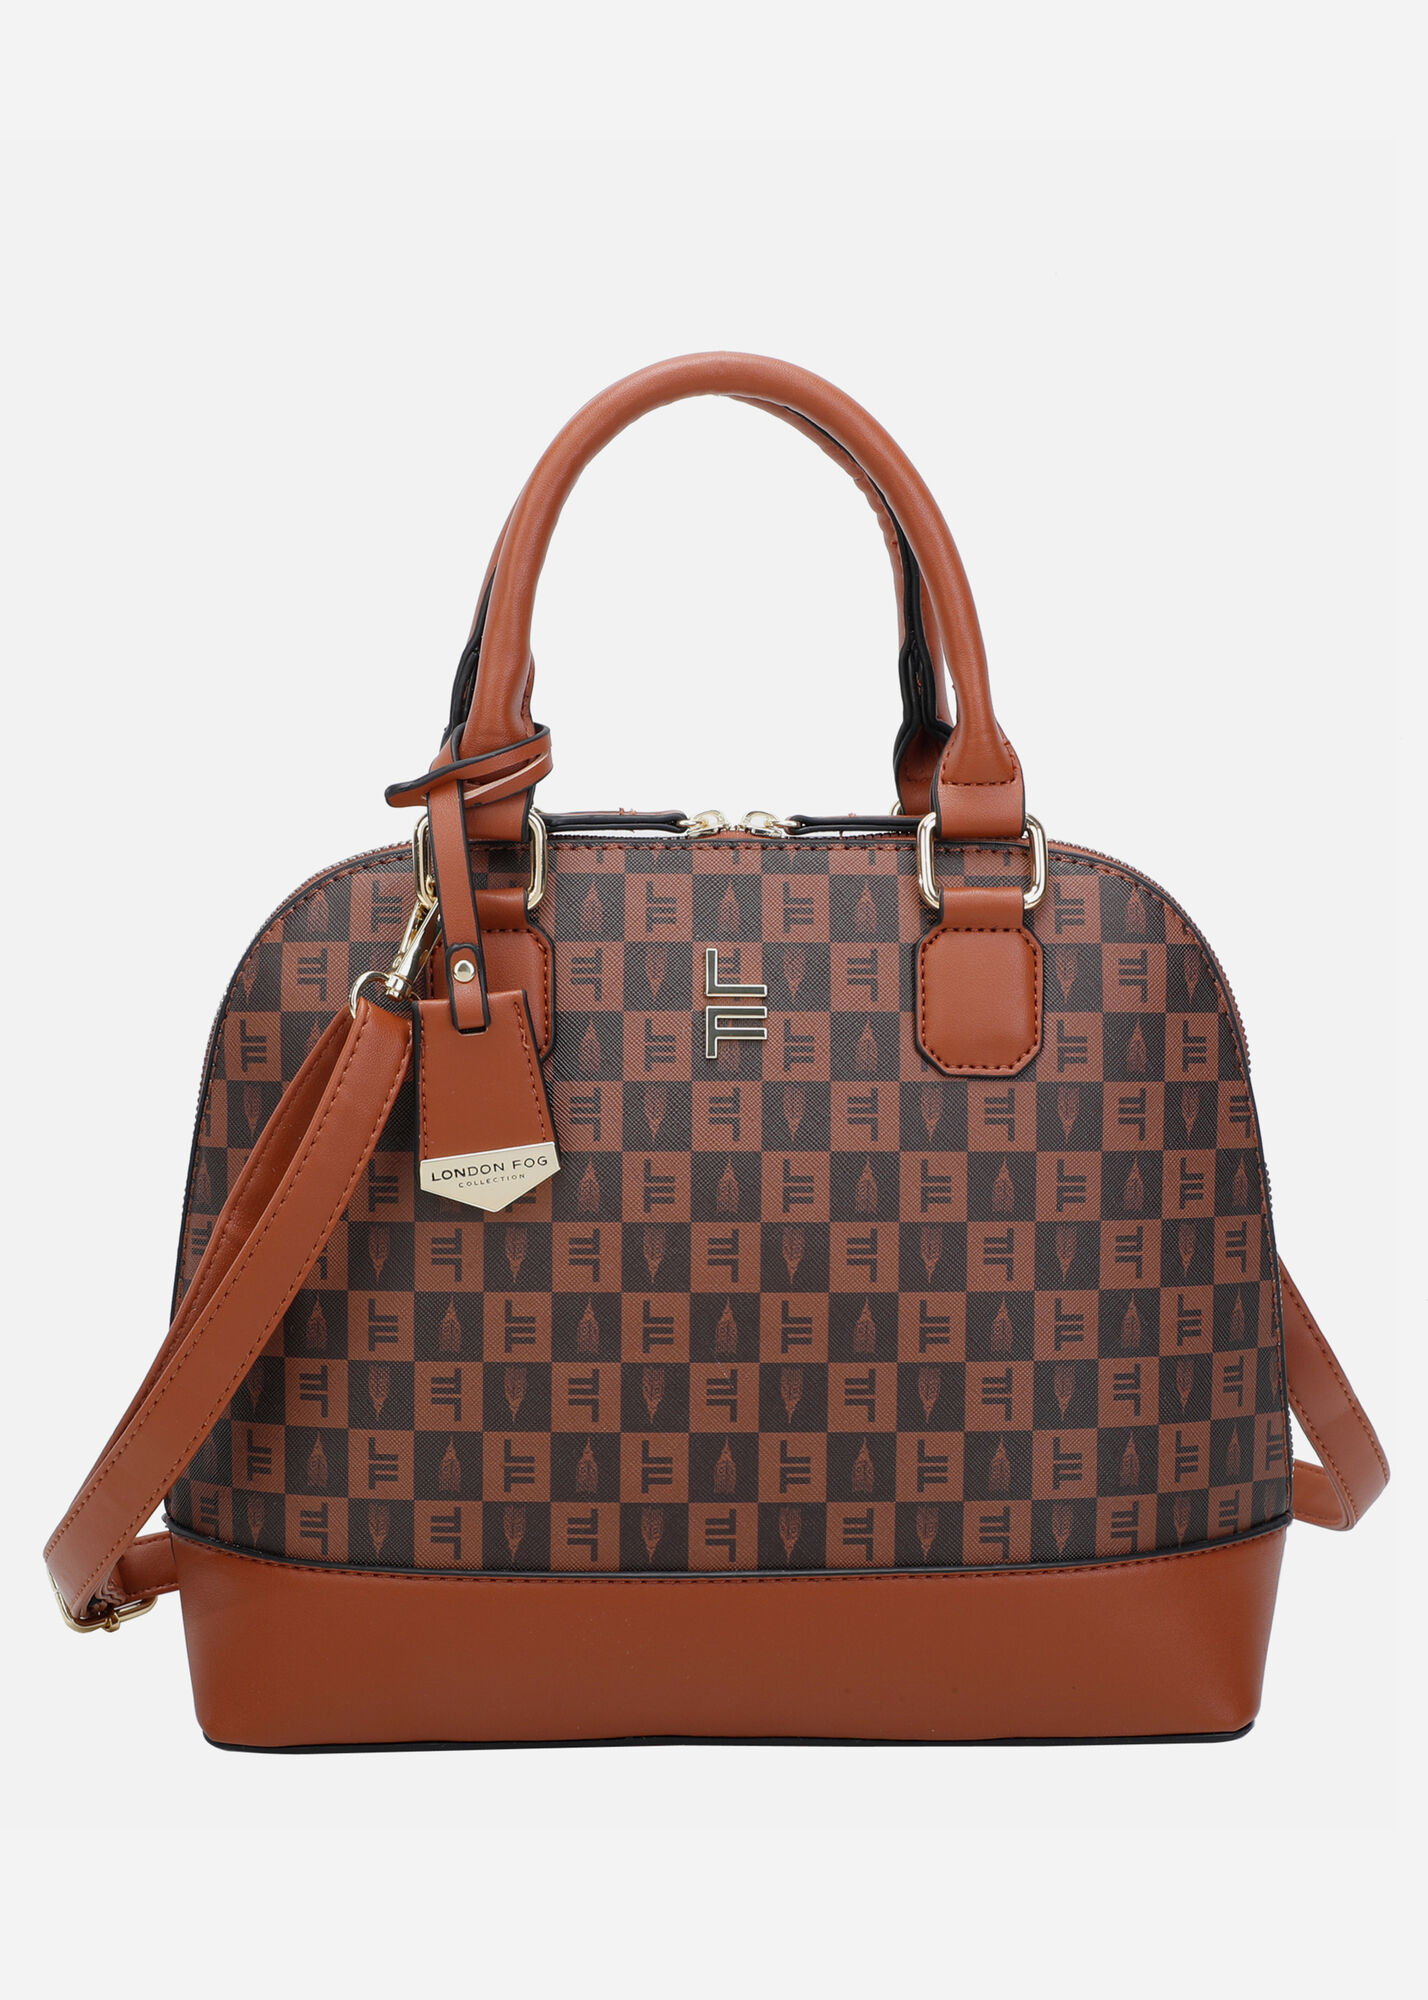 Louis Vuitton Speedy 20 Review - Luxe Front